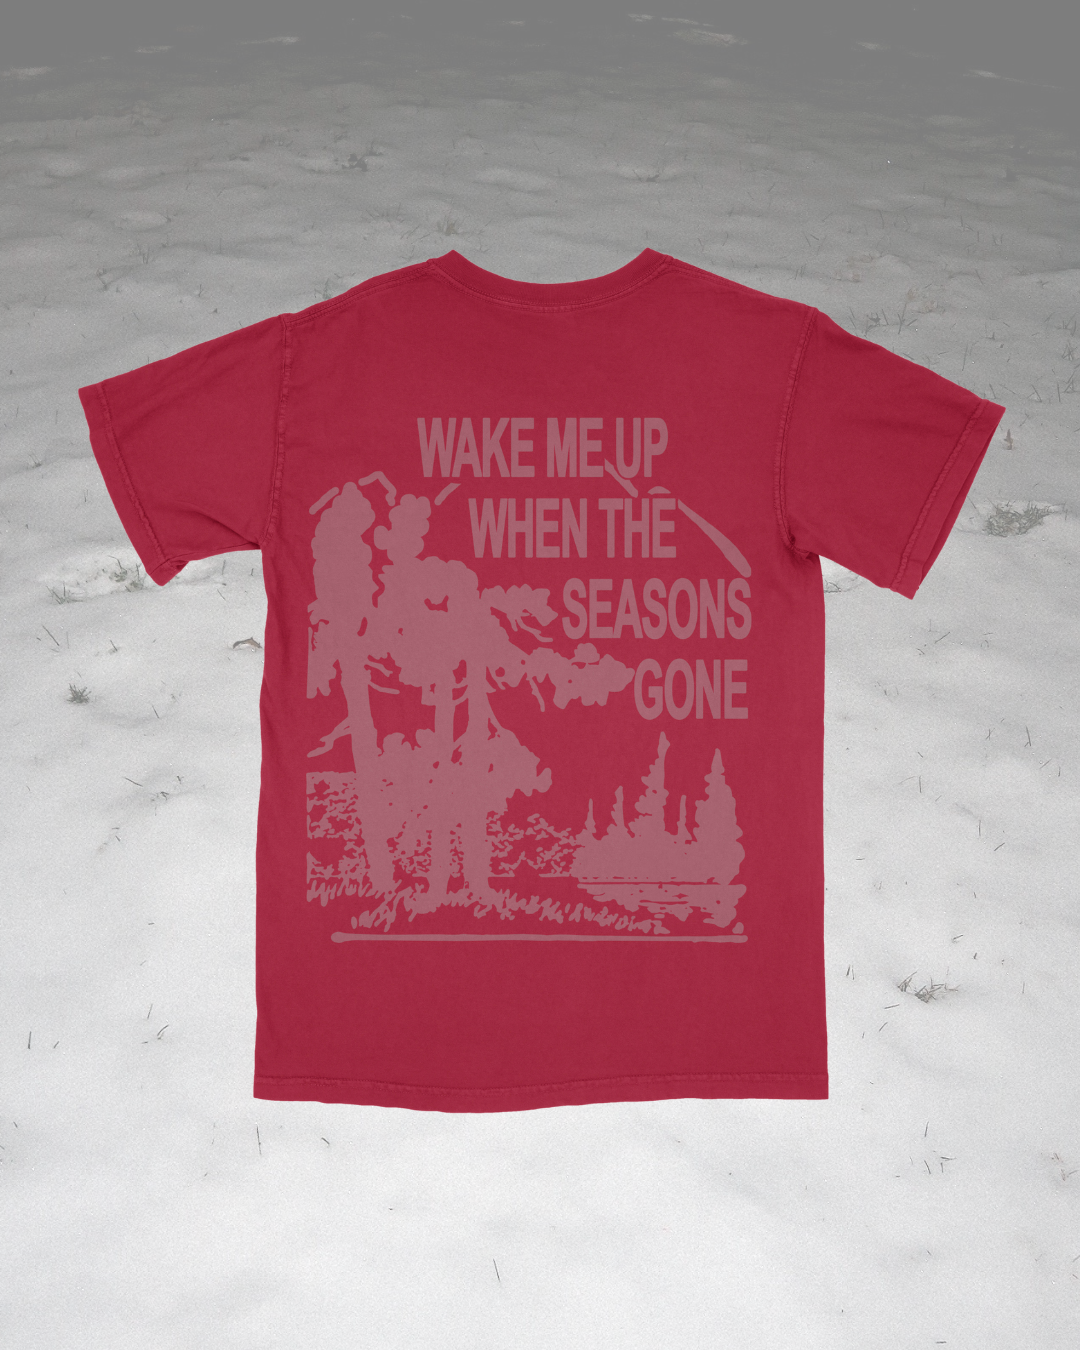 WAKE ME UP WHEN THE SEASONS GONE.. Garment Dyed Tee